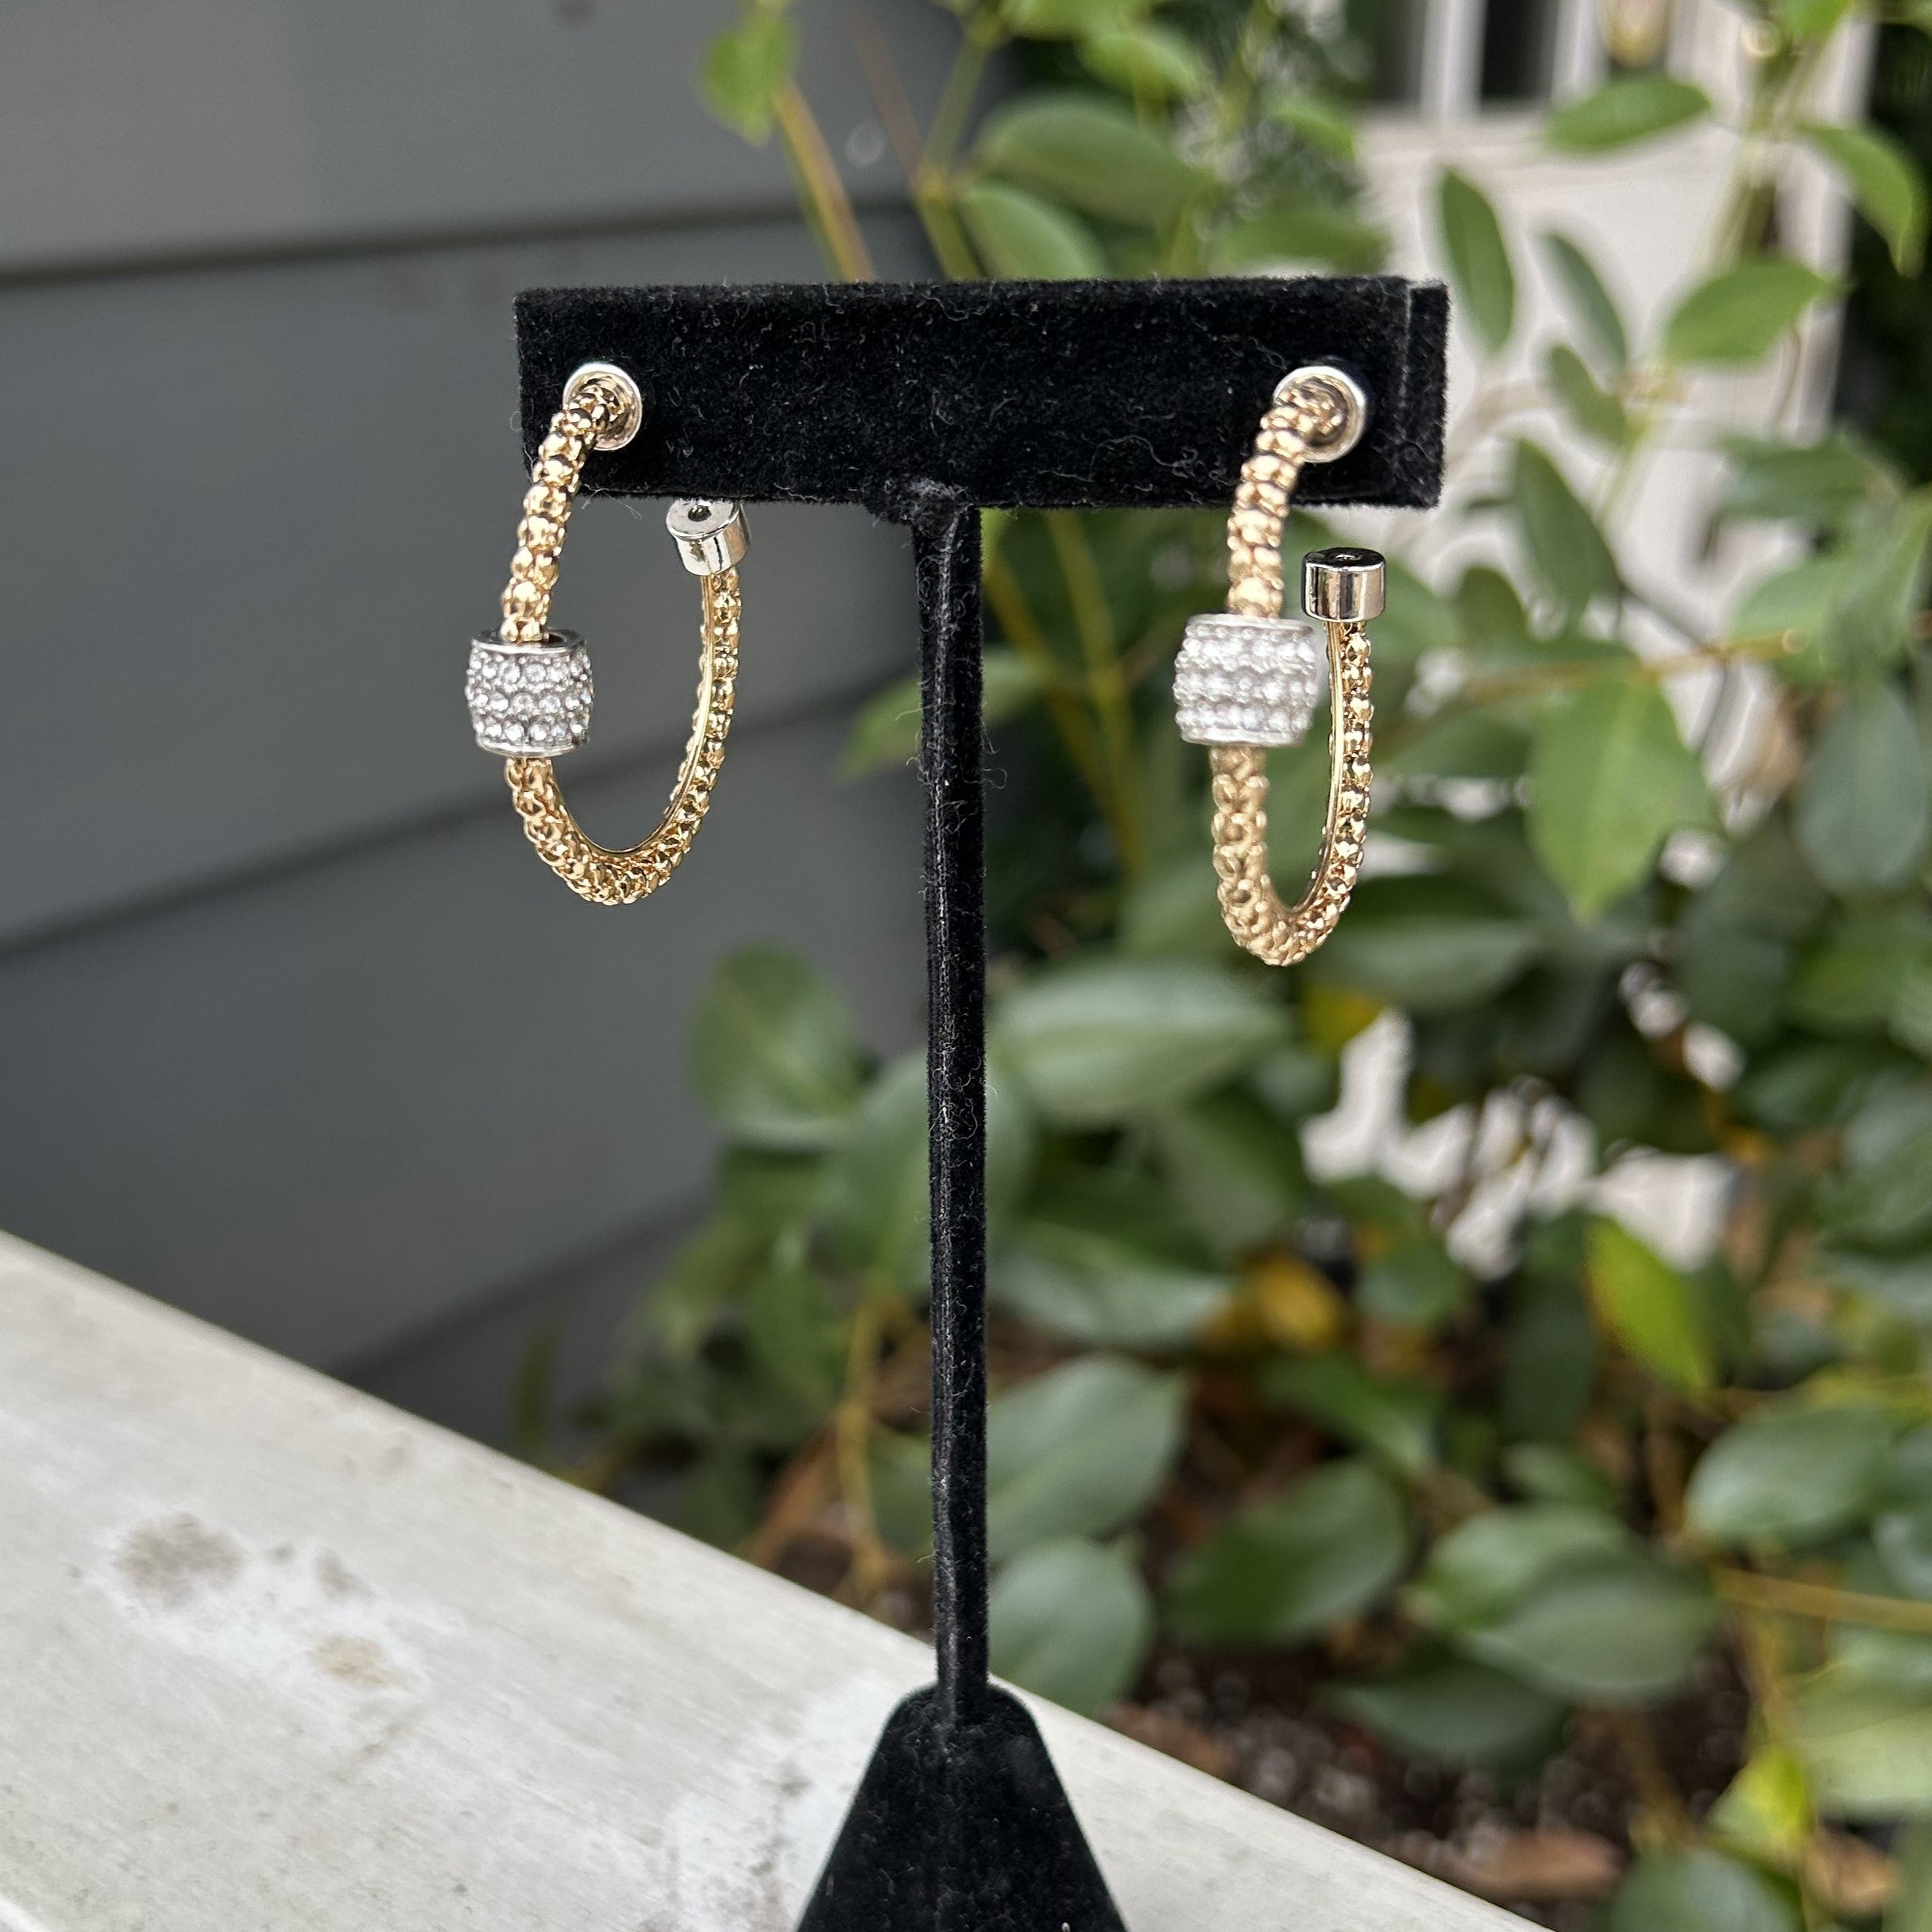 Treat yourself to timeless elegance with these stunning gold hoop earrings, featuring a dazzling, Pava diamond tube charm. Put an elegant finishing touch on your outfit with these sophisticated stud earrings - sure to be a staple piece in your jewelry collection!